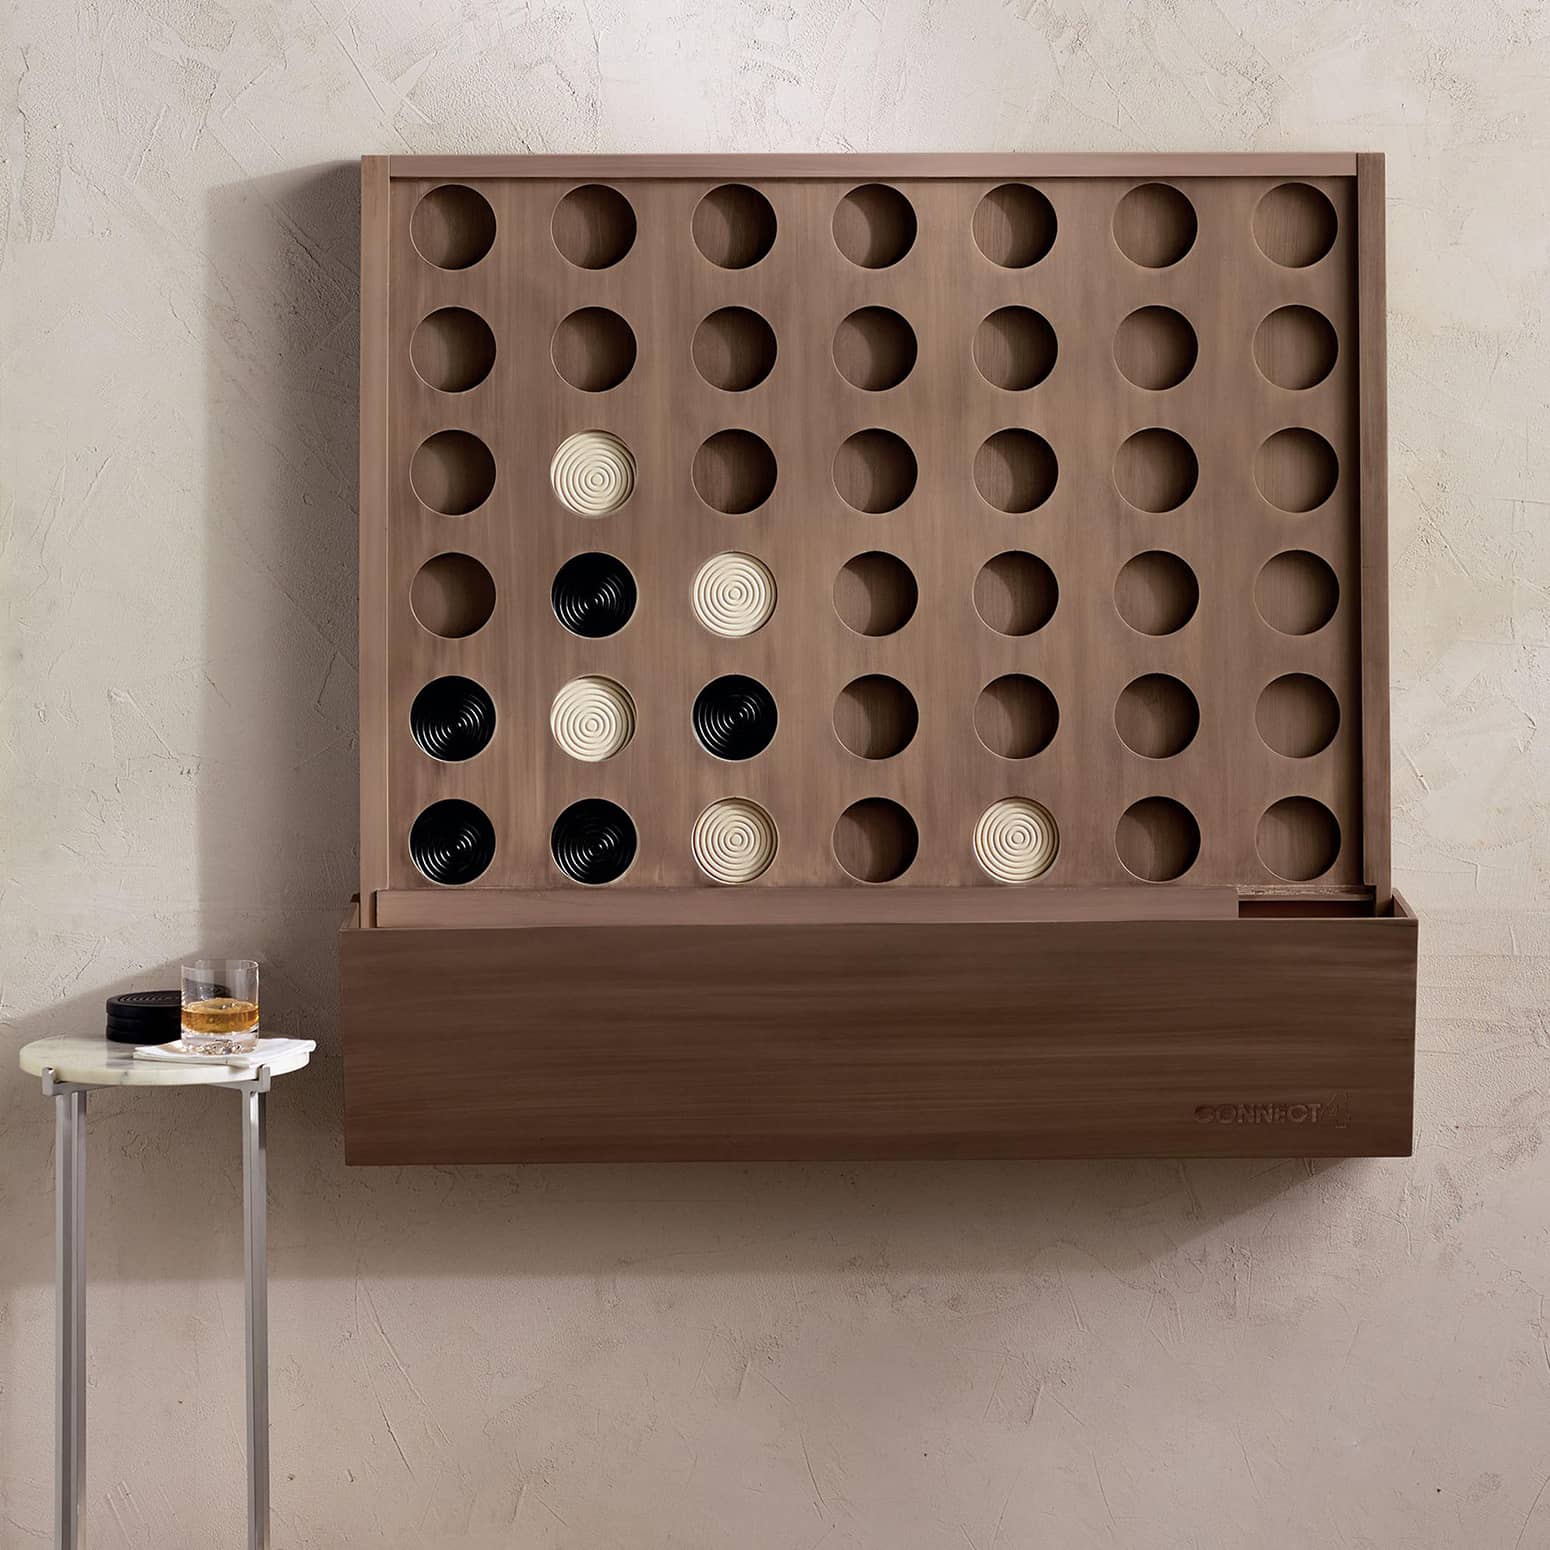 Gigantic Wall-Mounted Connect Four Game